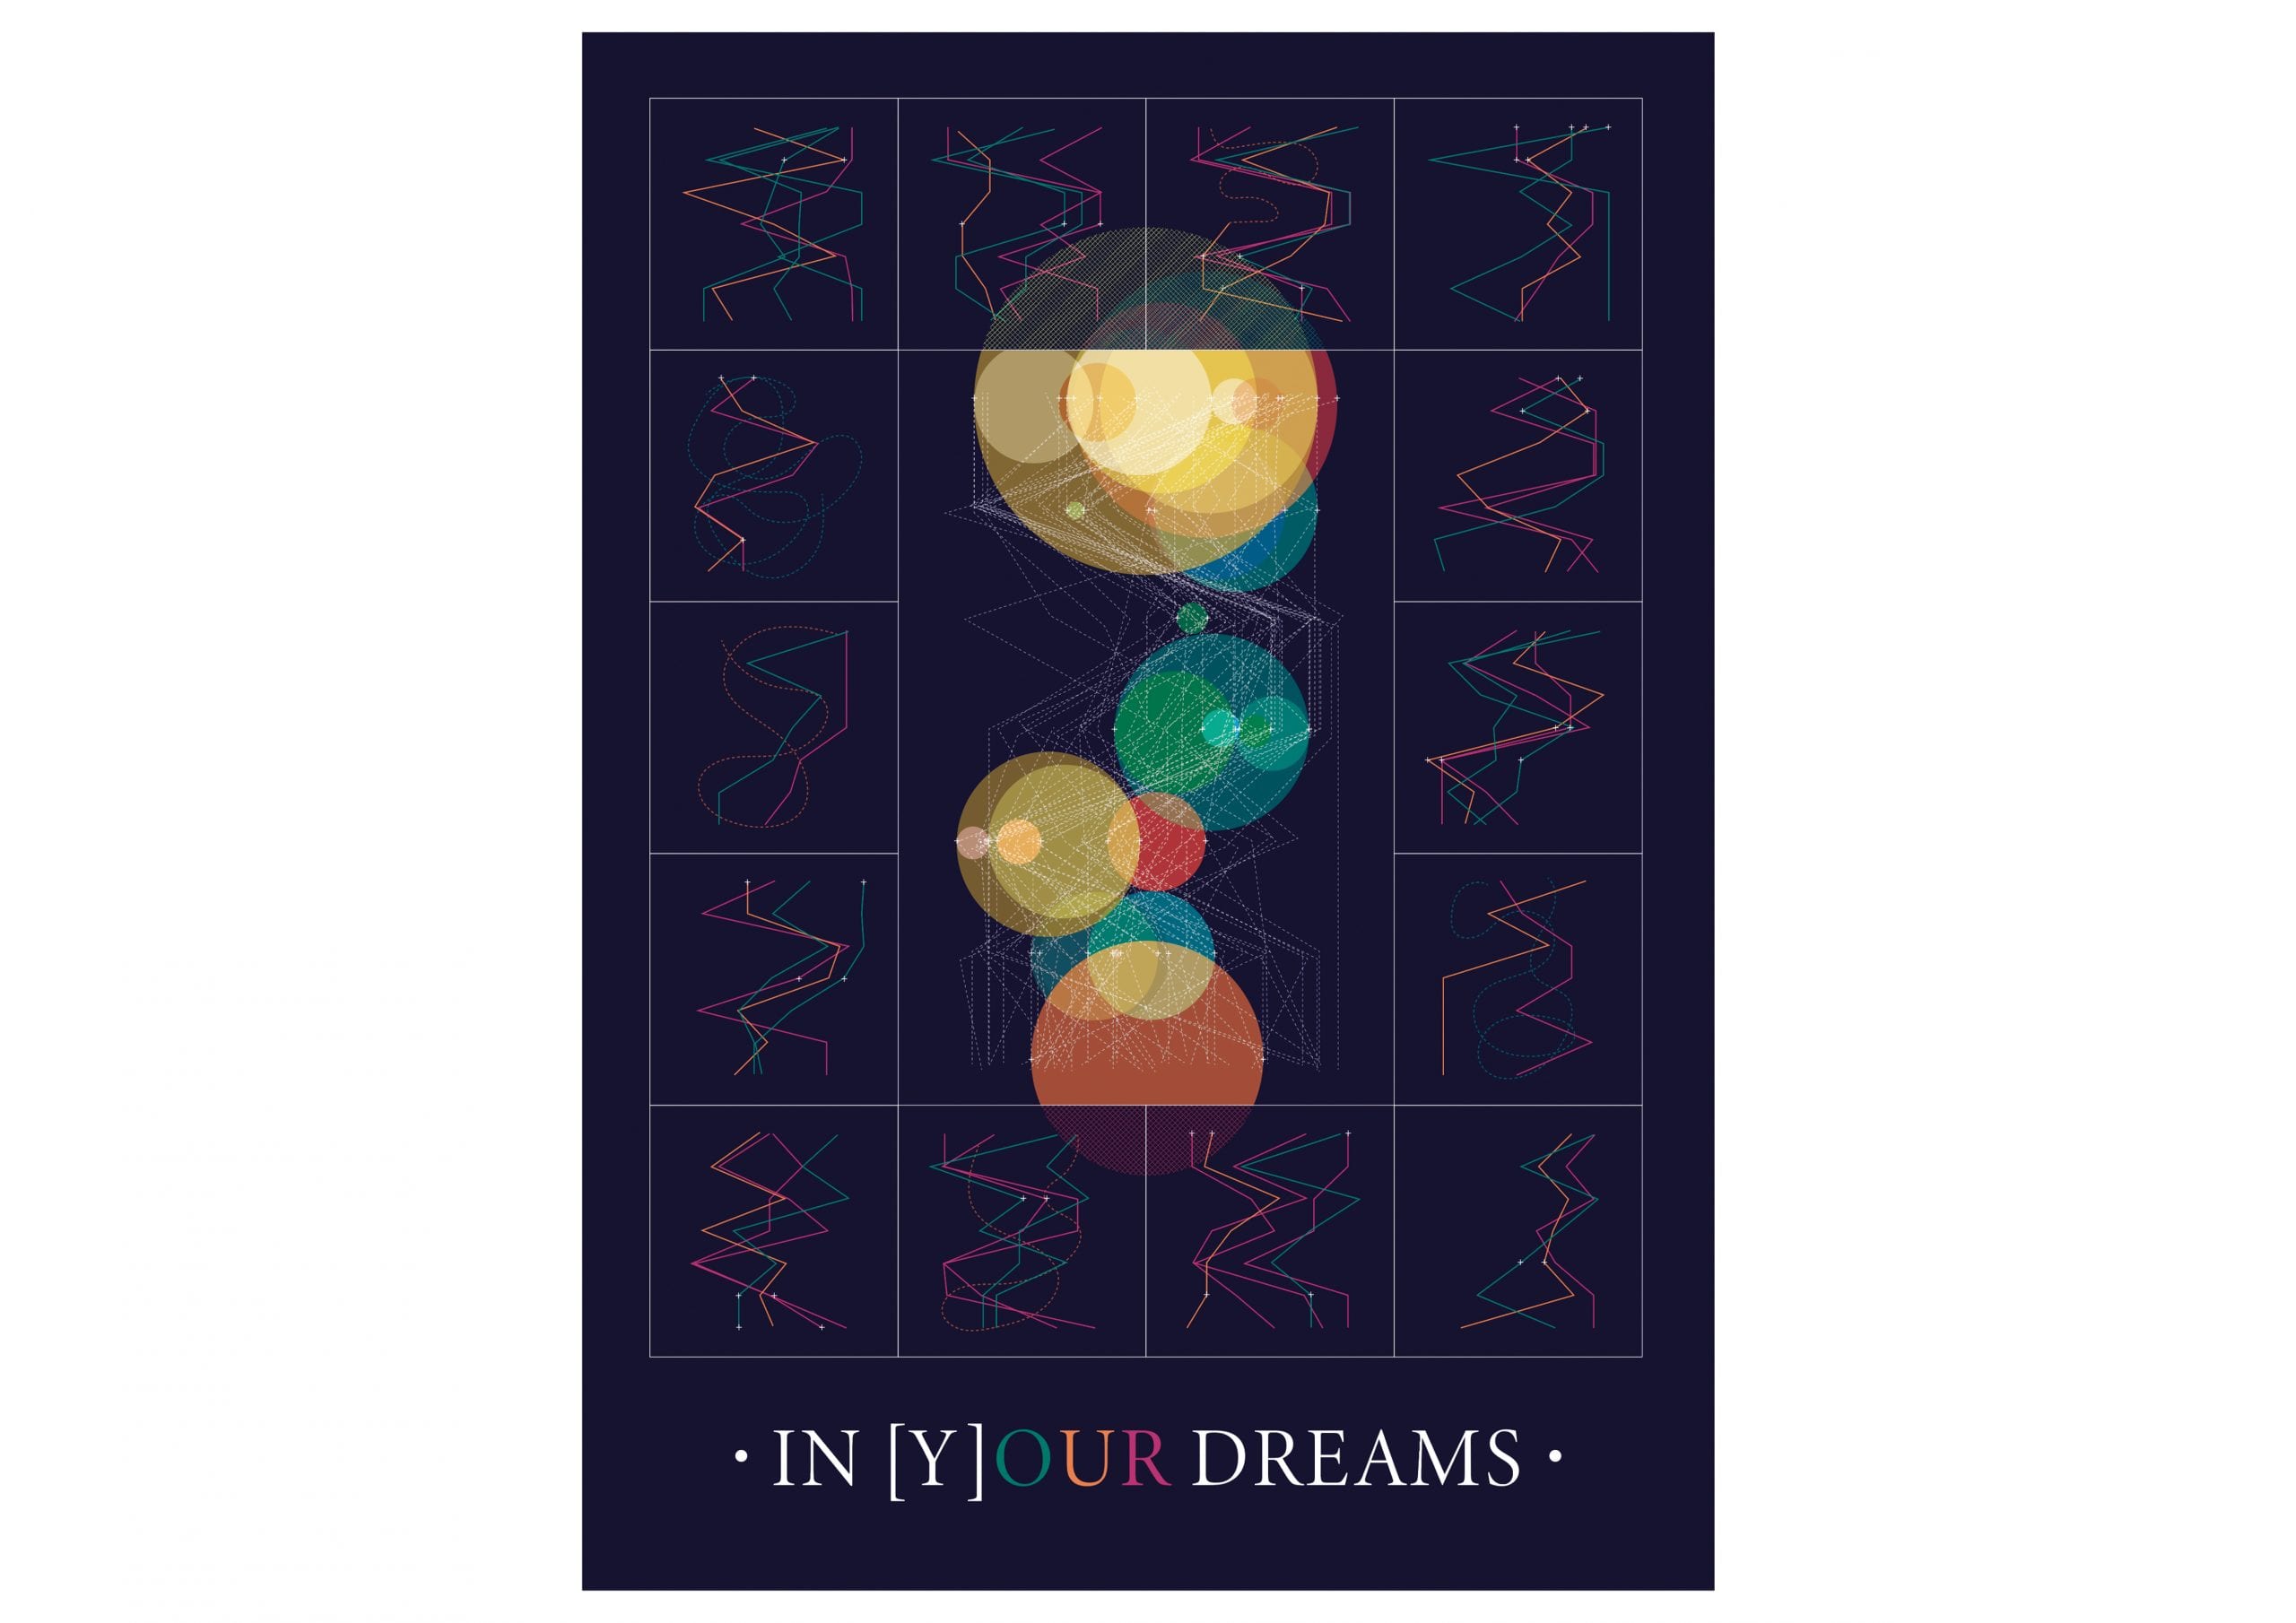 titled 'in your dreams' this is a complex plot of dream data collected and compilled colourfully.